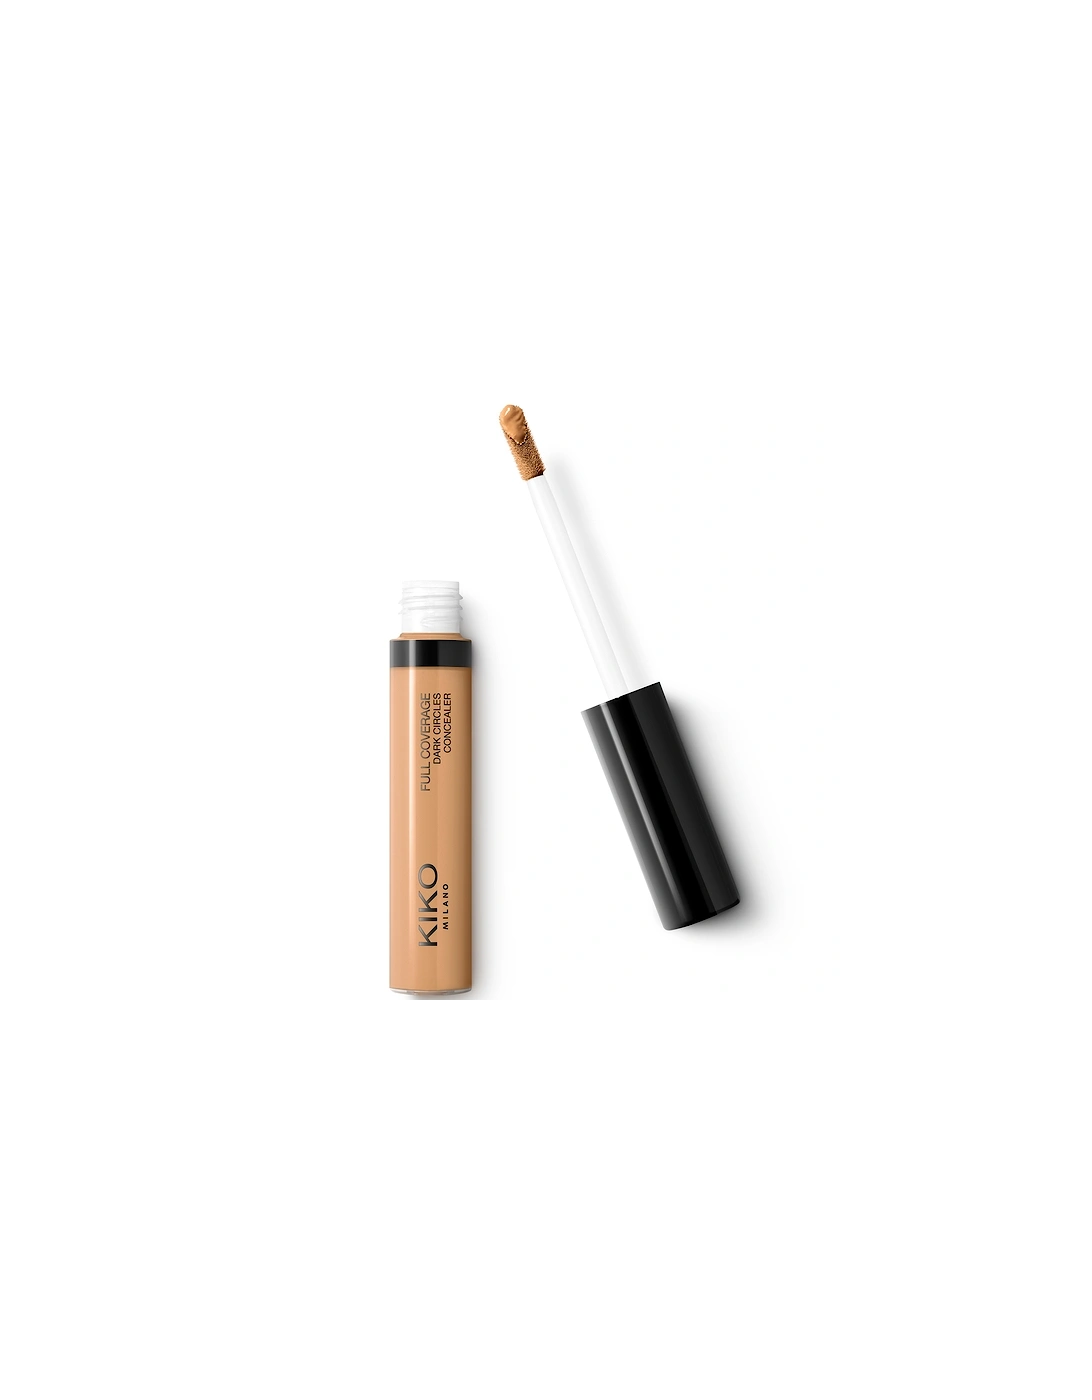 Full Coverage Dark Circles Concealer - 11 Butterscotch, 2 of 1